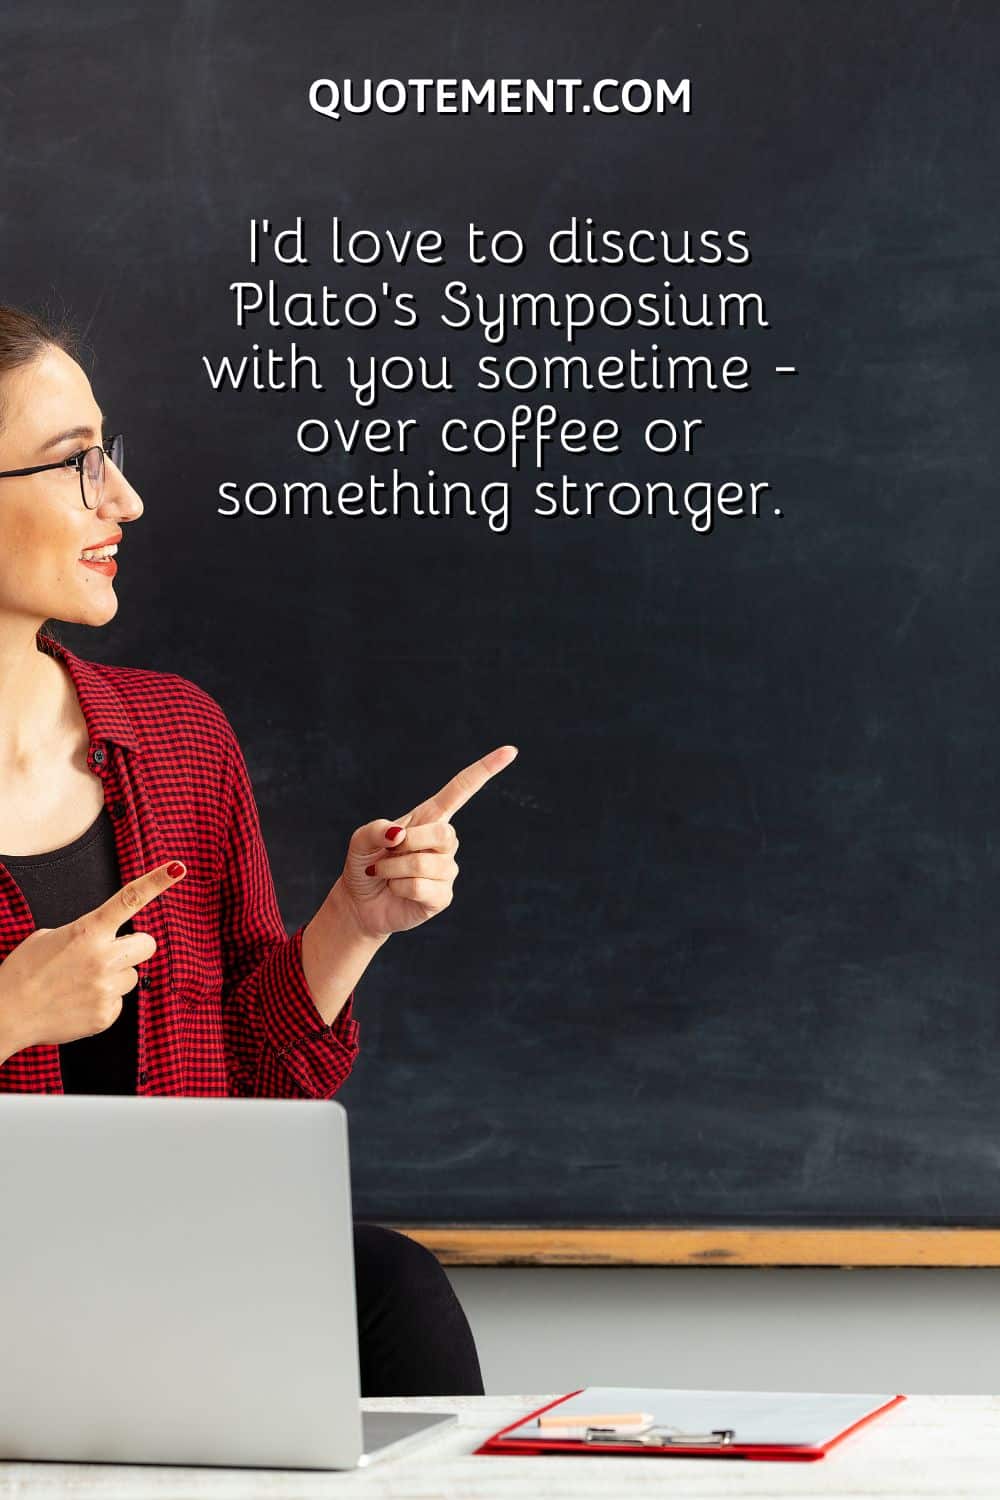 I'd love to discuss Plato's Symposium with you sometime - over coffee or something stronger